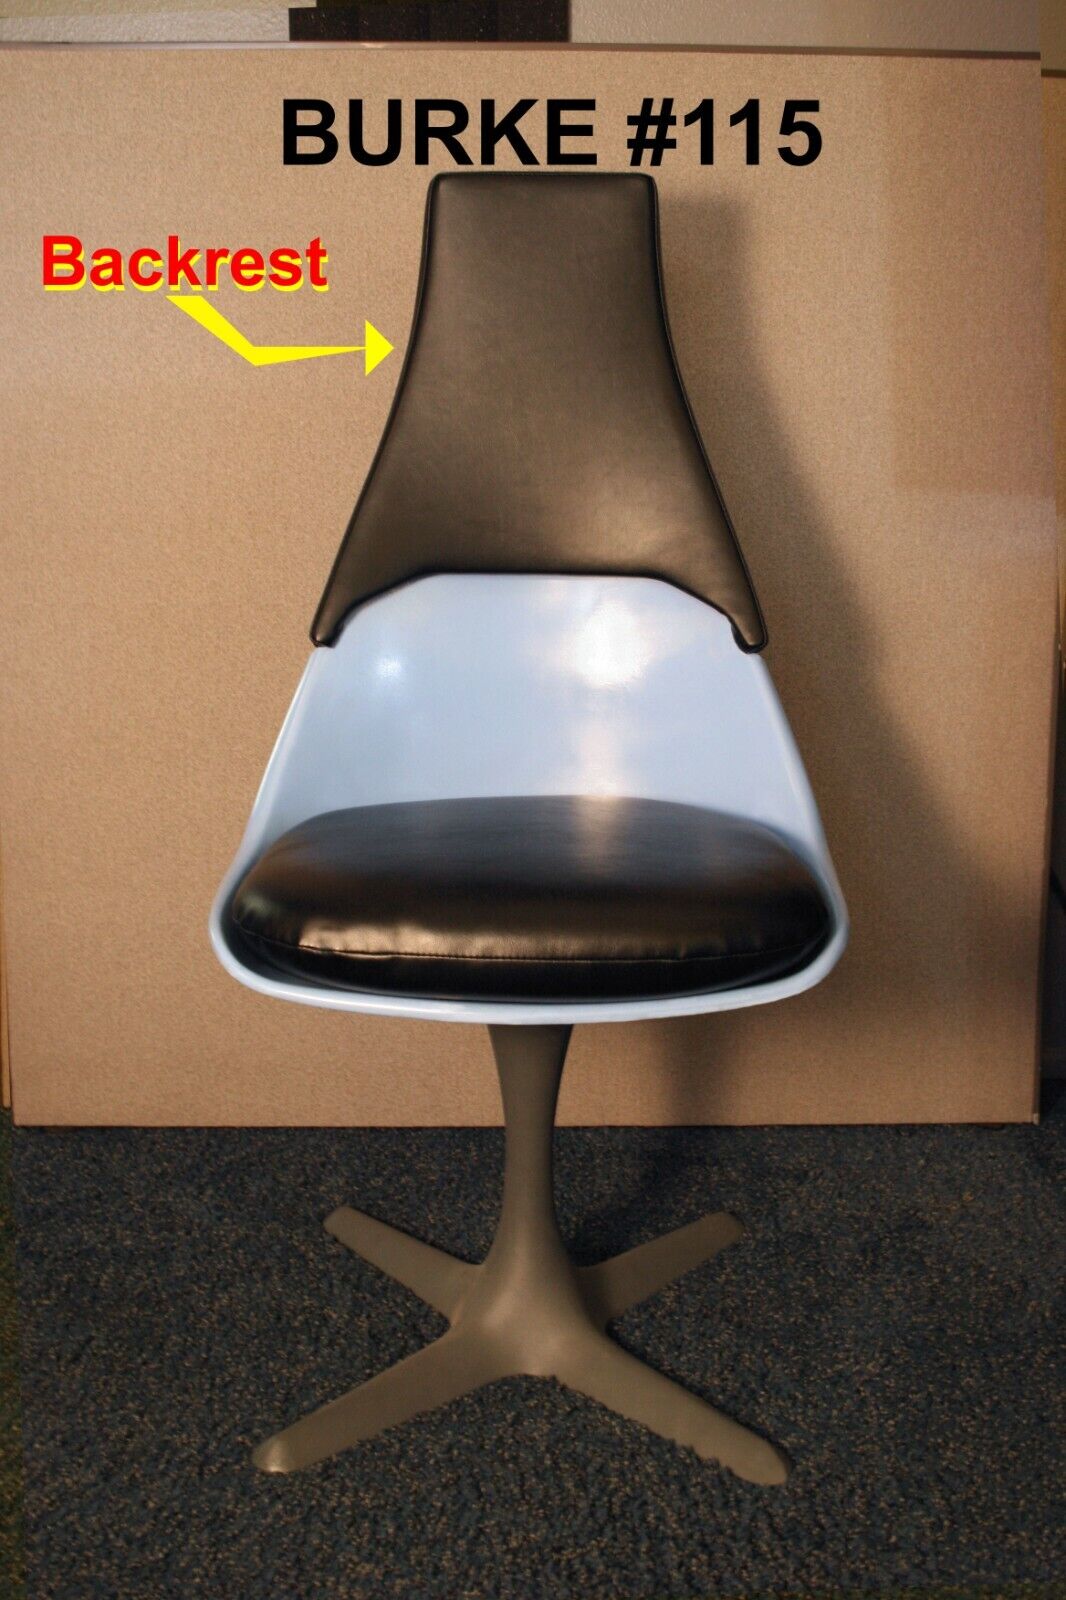 Backrest to upgrade your Burke #115 chair to a Star Trek (TOS) Chair